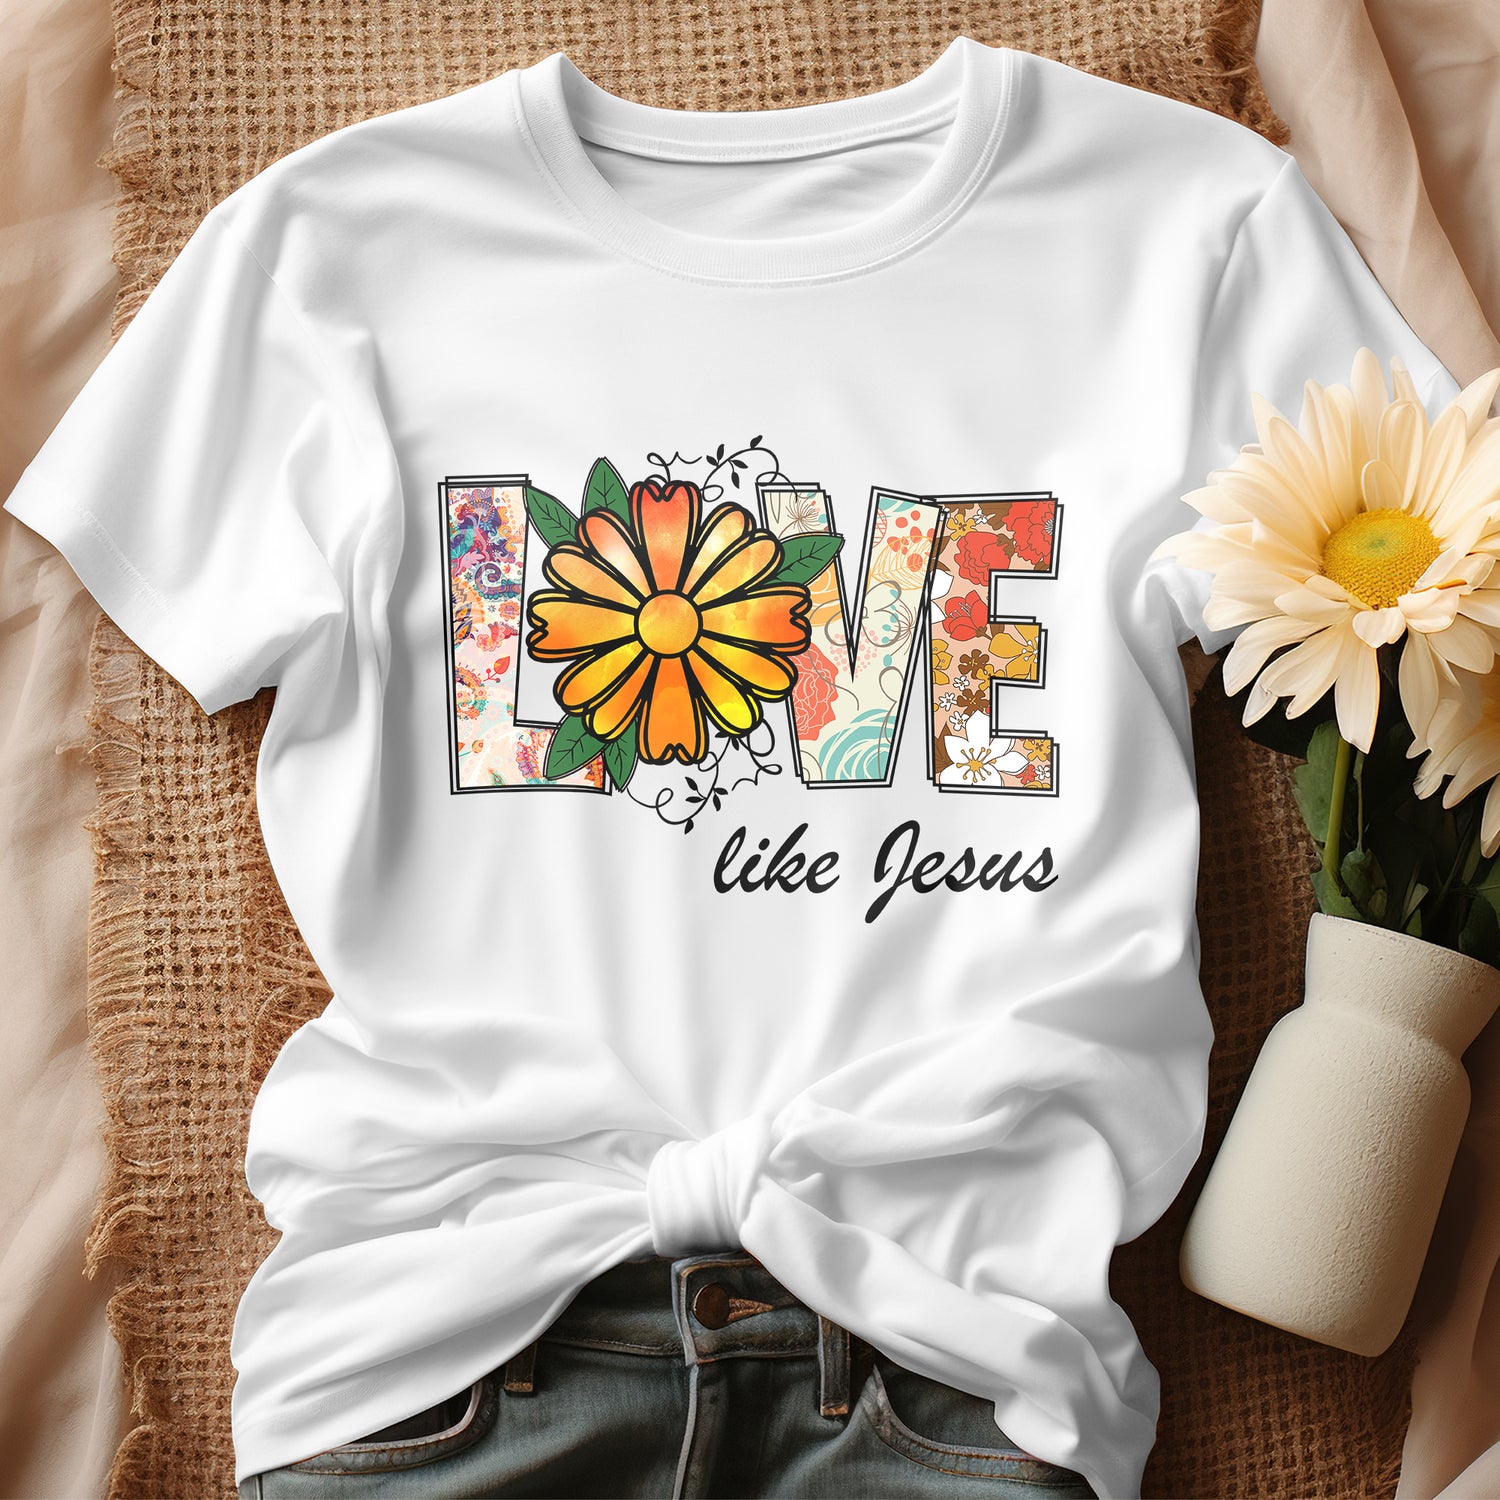 Beauty & Quote Shirts